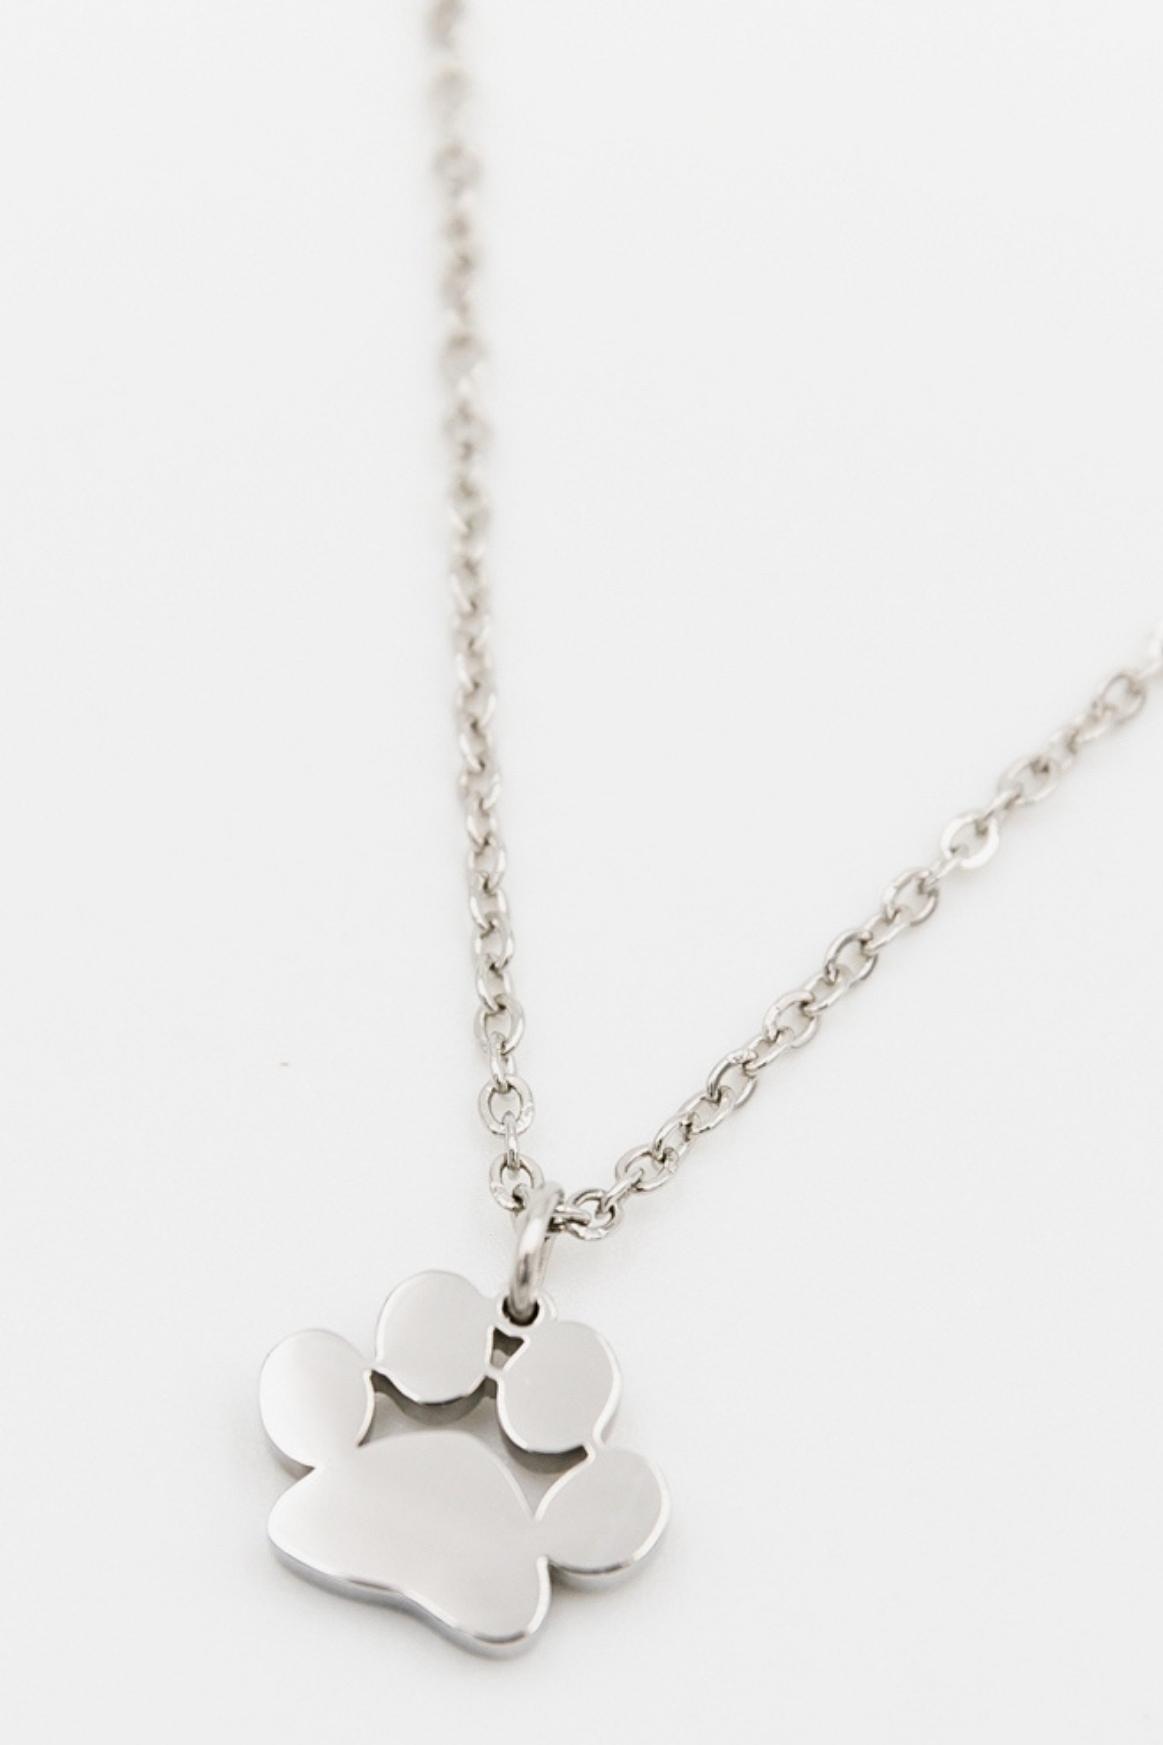 Dainty Sterling Silver Double Dog Paw Prints Cut-out Necklace, 16